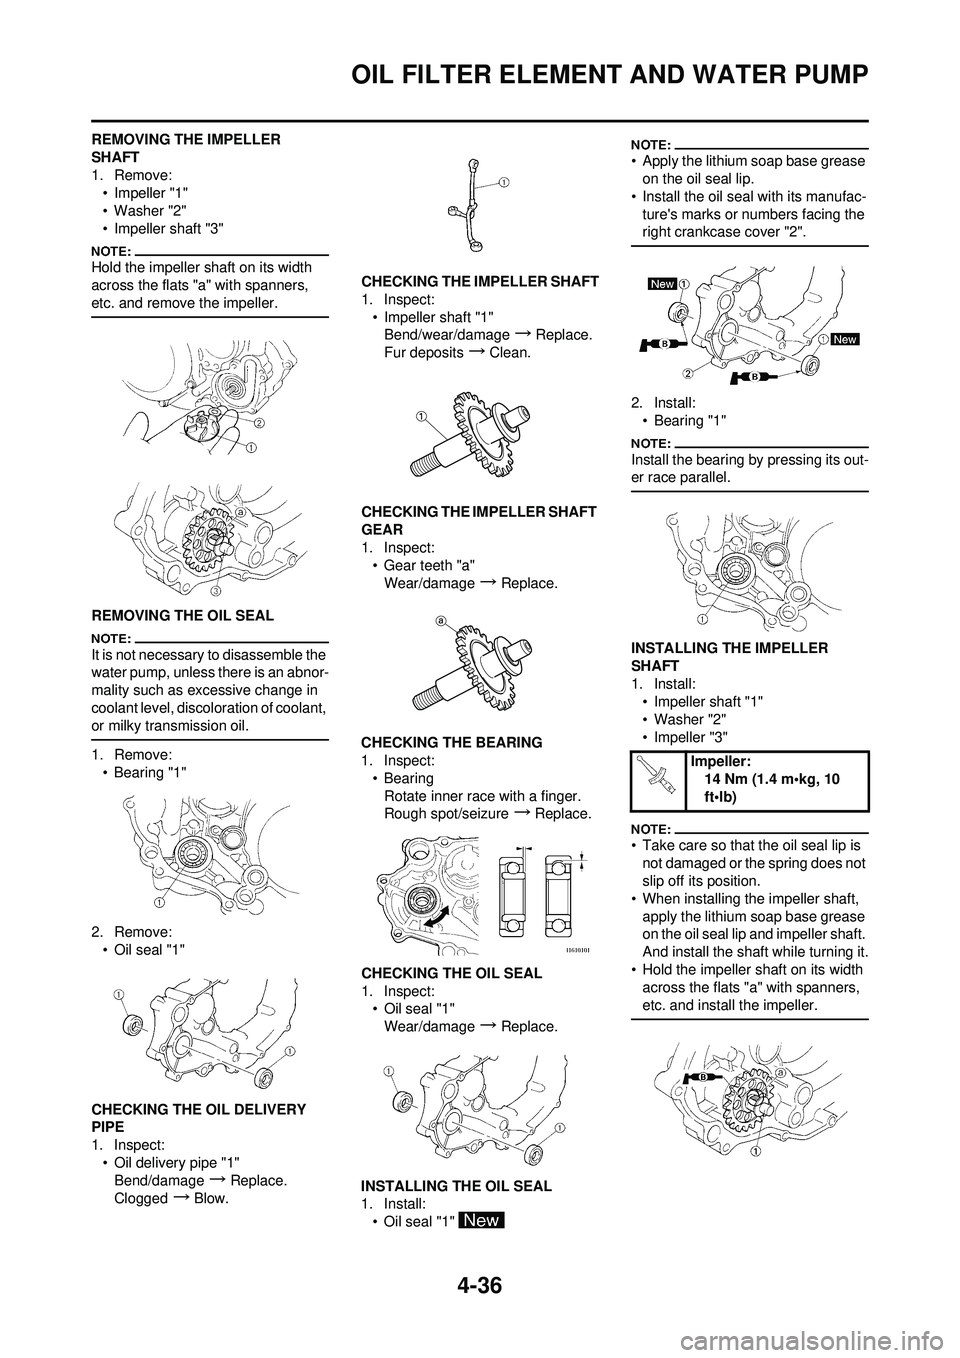 YAMAHA YZ250F 2008  Betriebsanleitungen (in German) 4-36
OIL FILTER ELEMENT AND WATER PUMP
REMOVING THE IMPELLER 
SHAFT
1. Remove:•Impeller "1"
• Washer "2"
• Impeller shaft "3"
Hold the impeller shaft on its width 
across the flats "a" with span